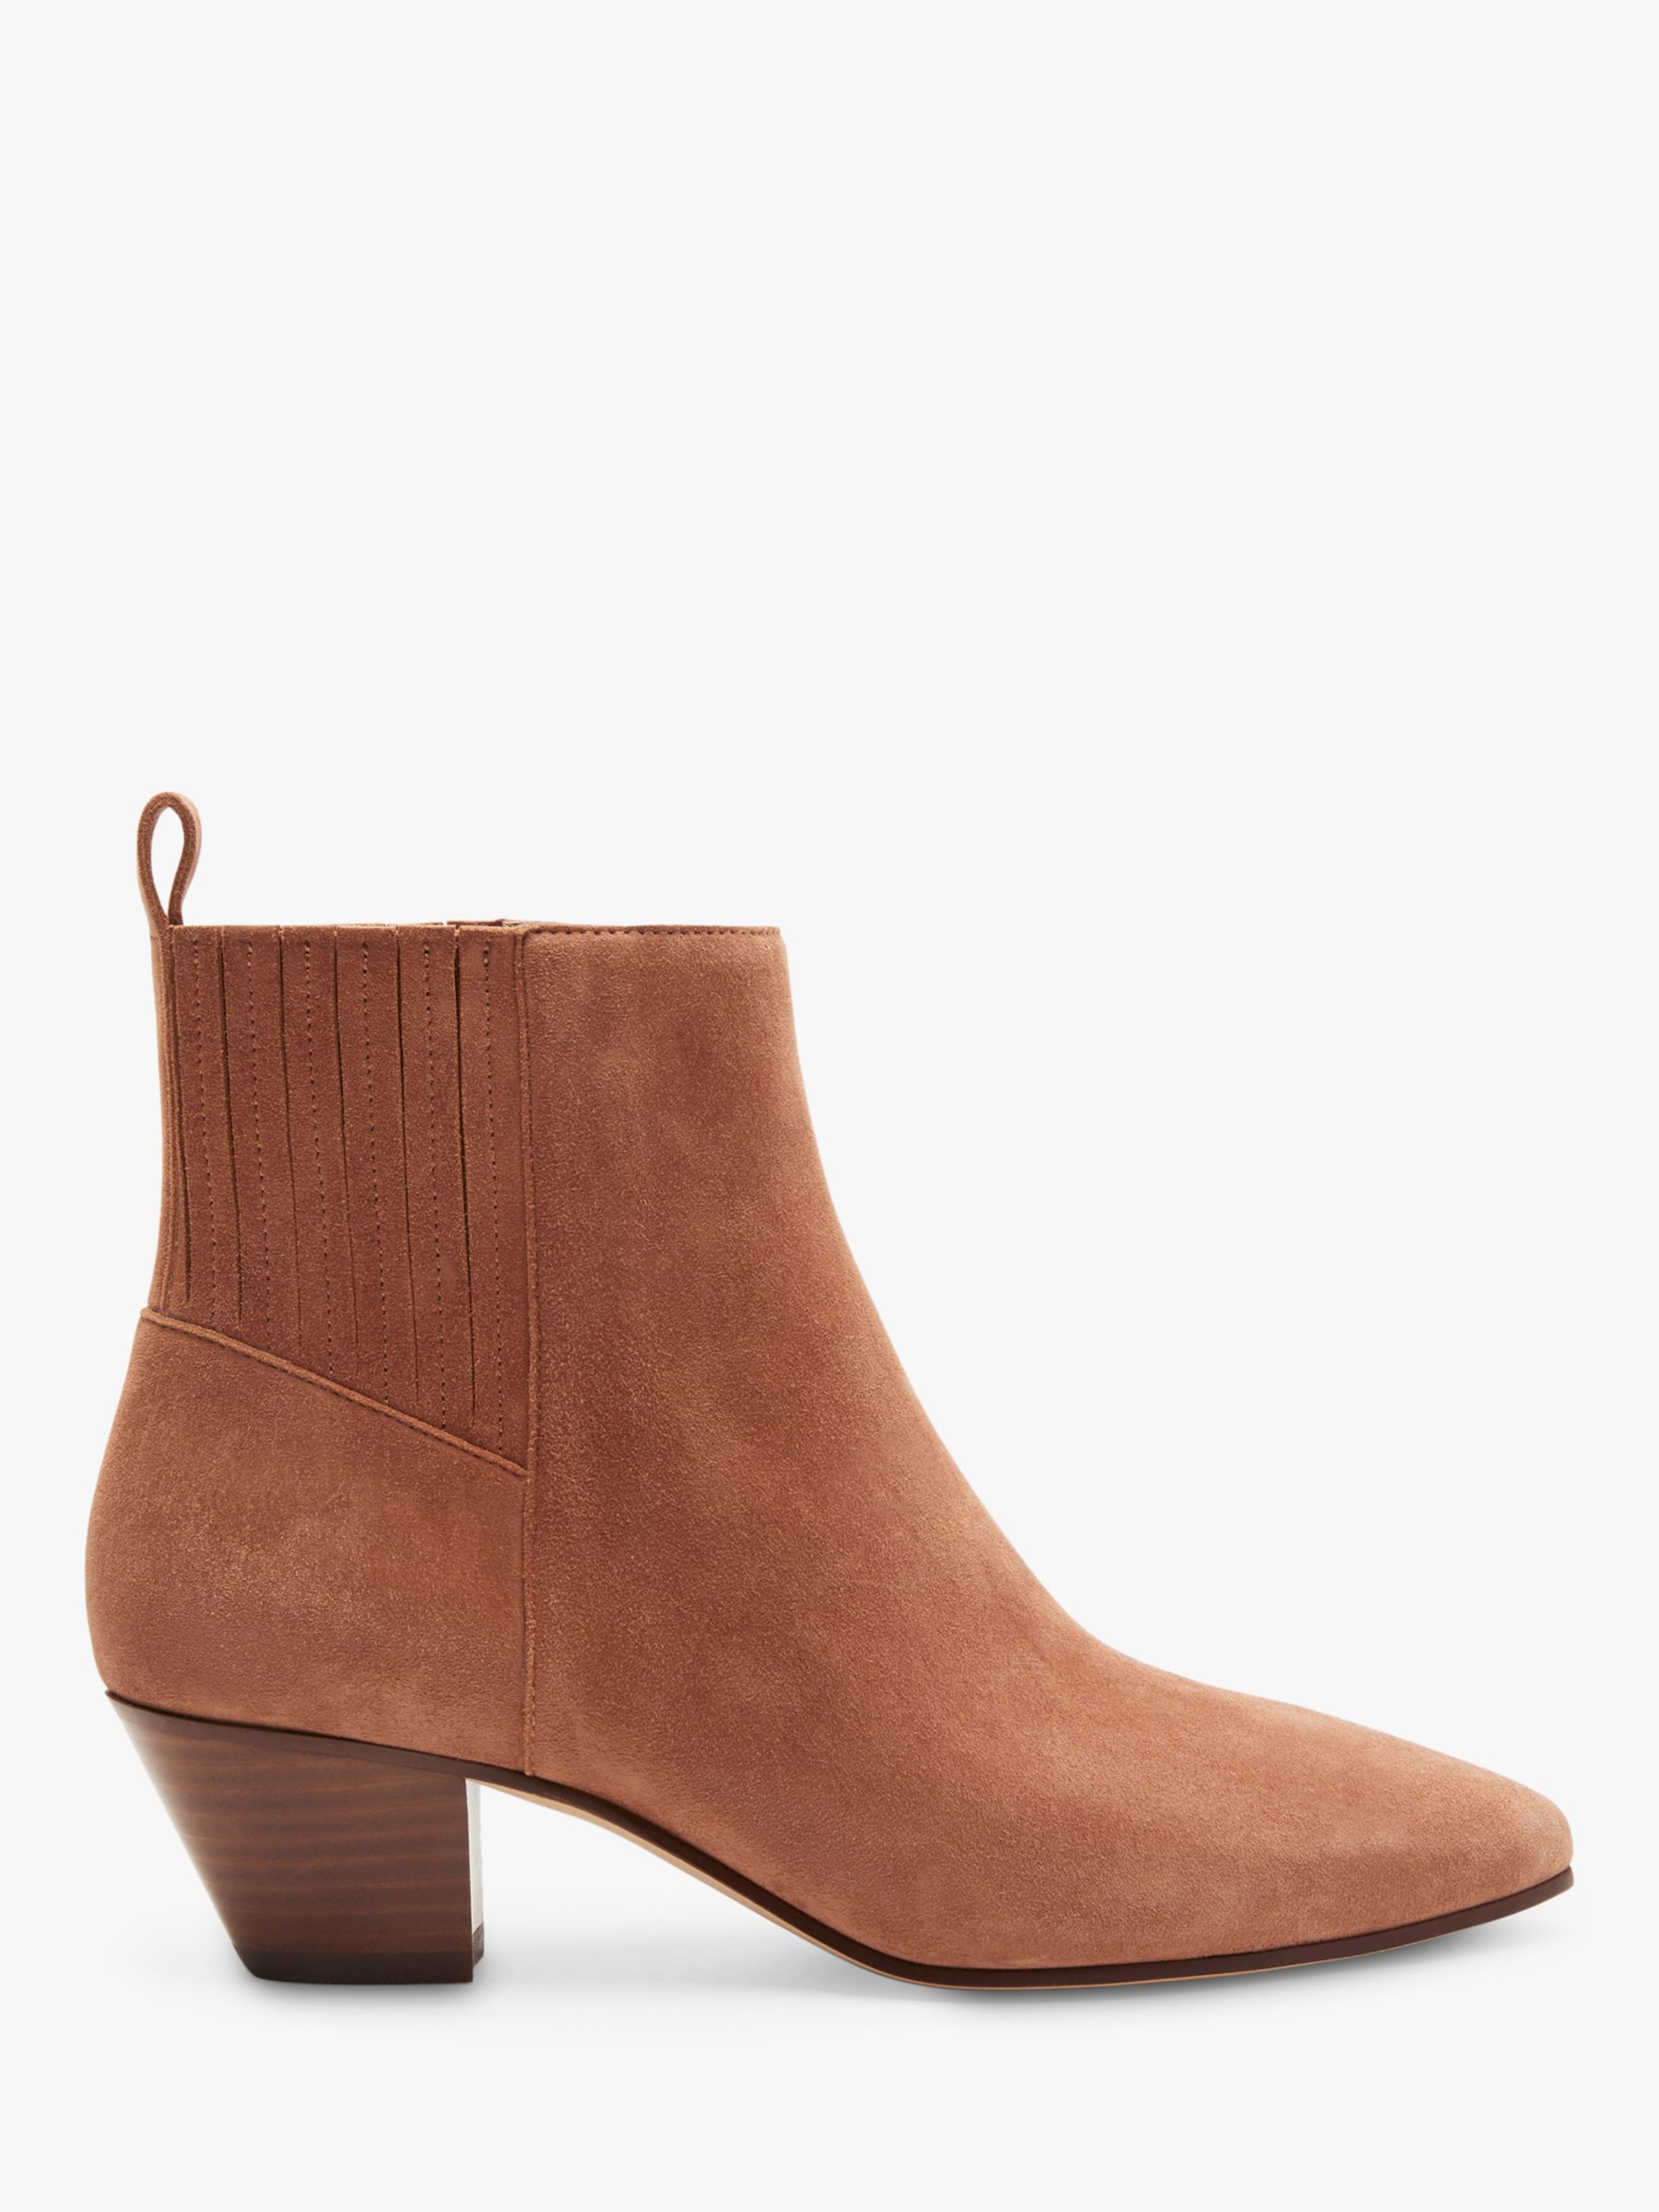 Boden Western Suede Ankle Boots